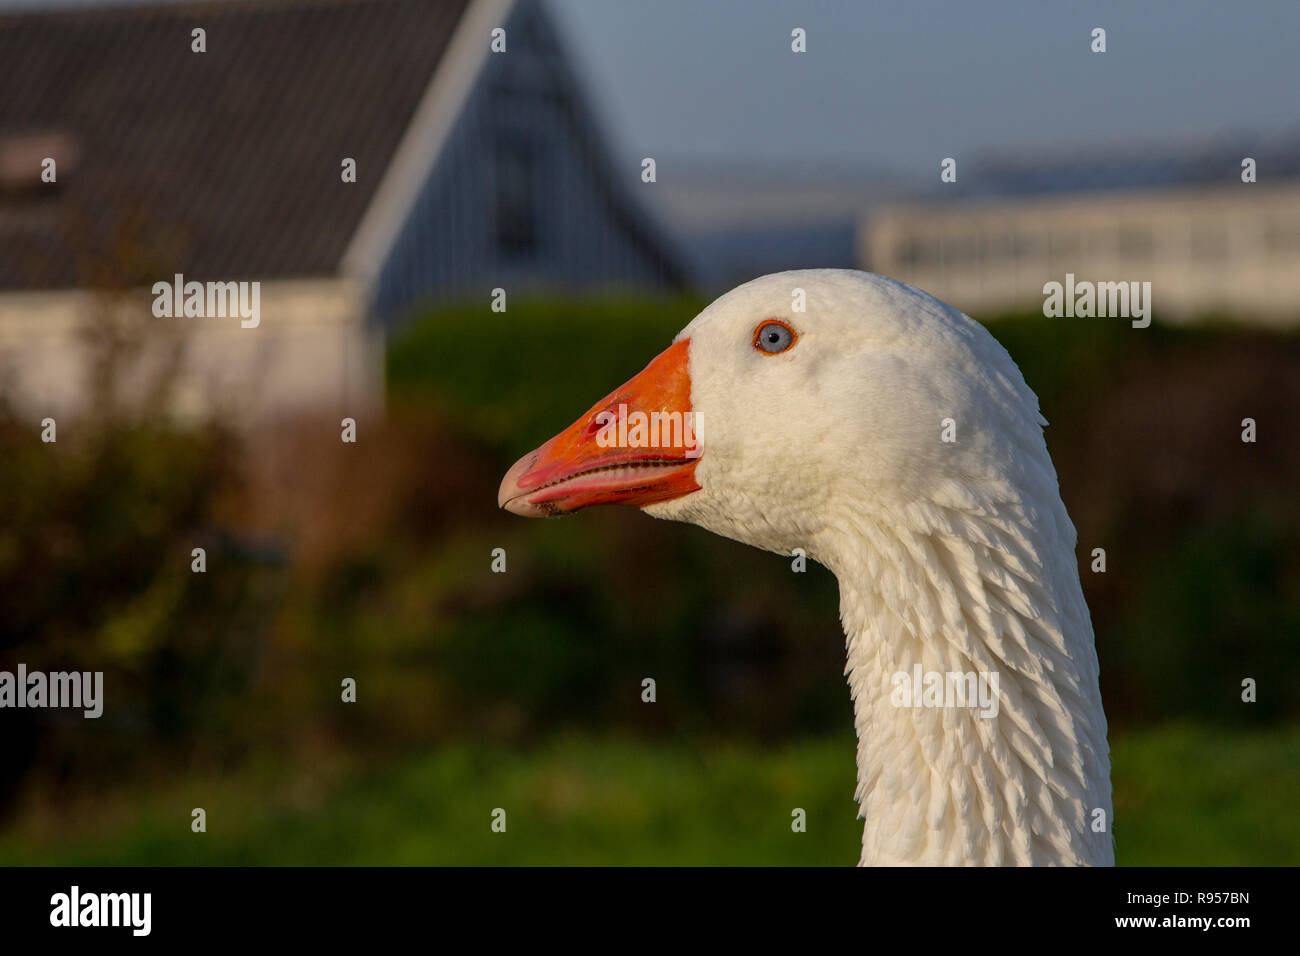 Close up portrait en profile of a white Emden goose with orange beak with a blurred unsharp background. Stock Photo